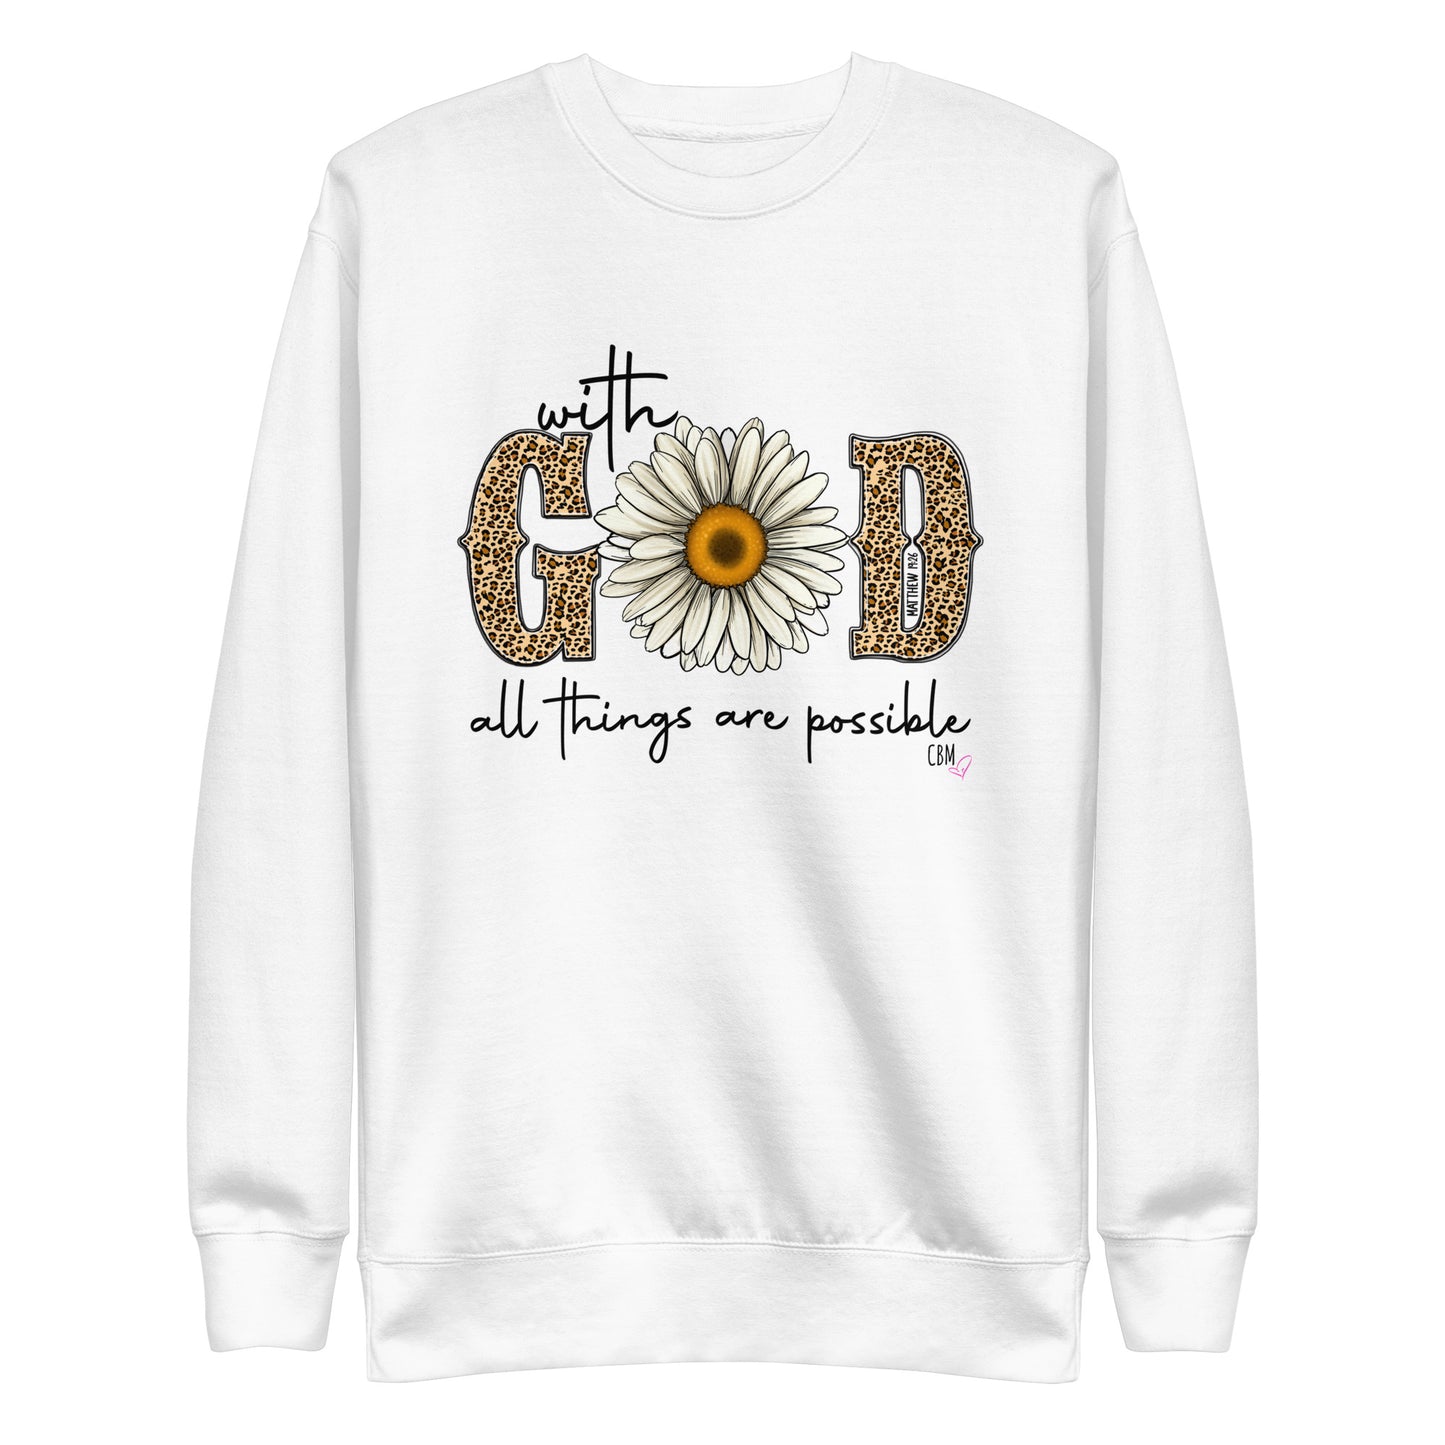 GOD Sunflower "All things are Possible" Premium Sweatshirt